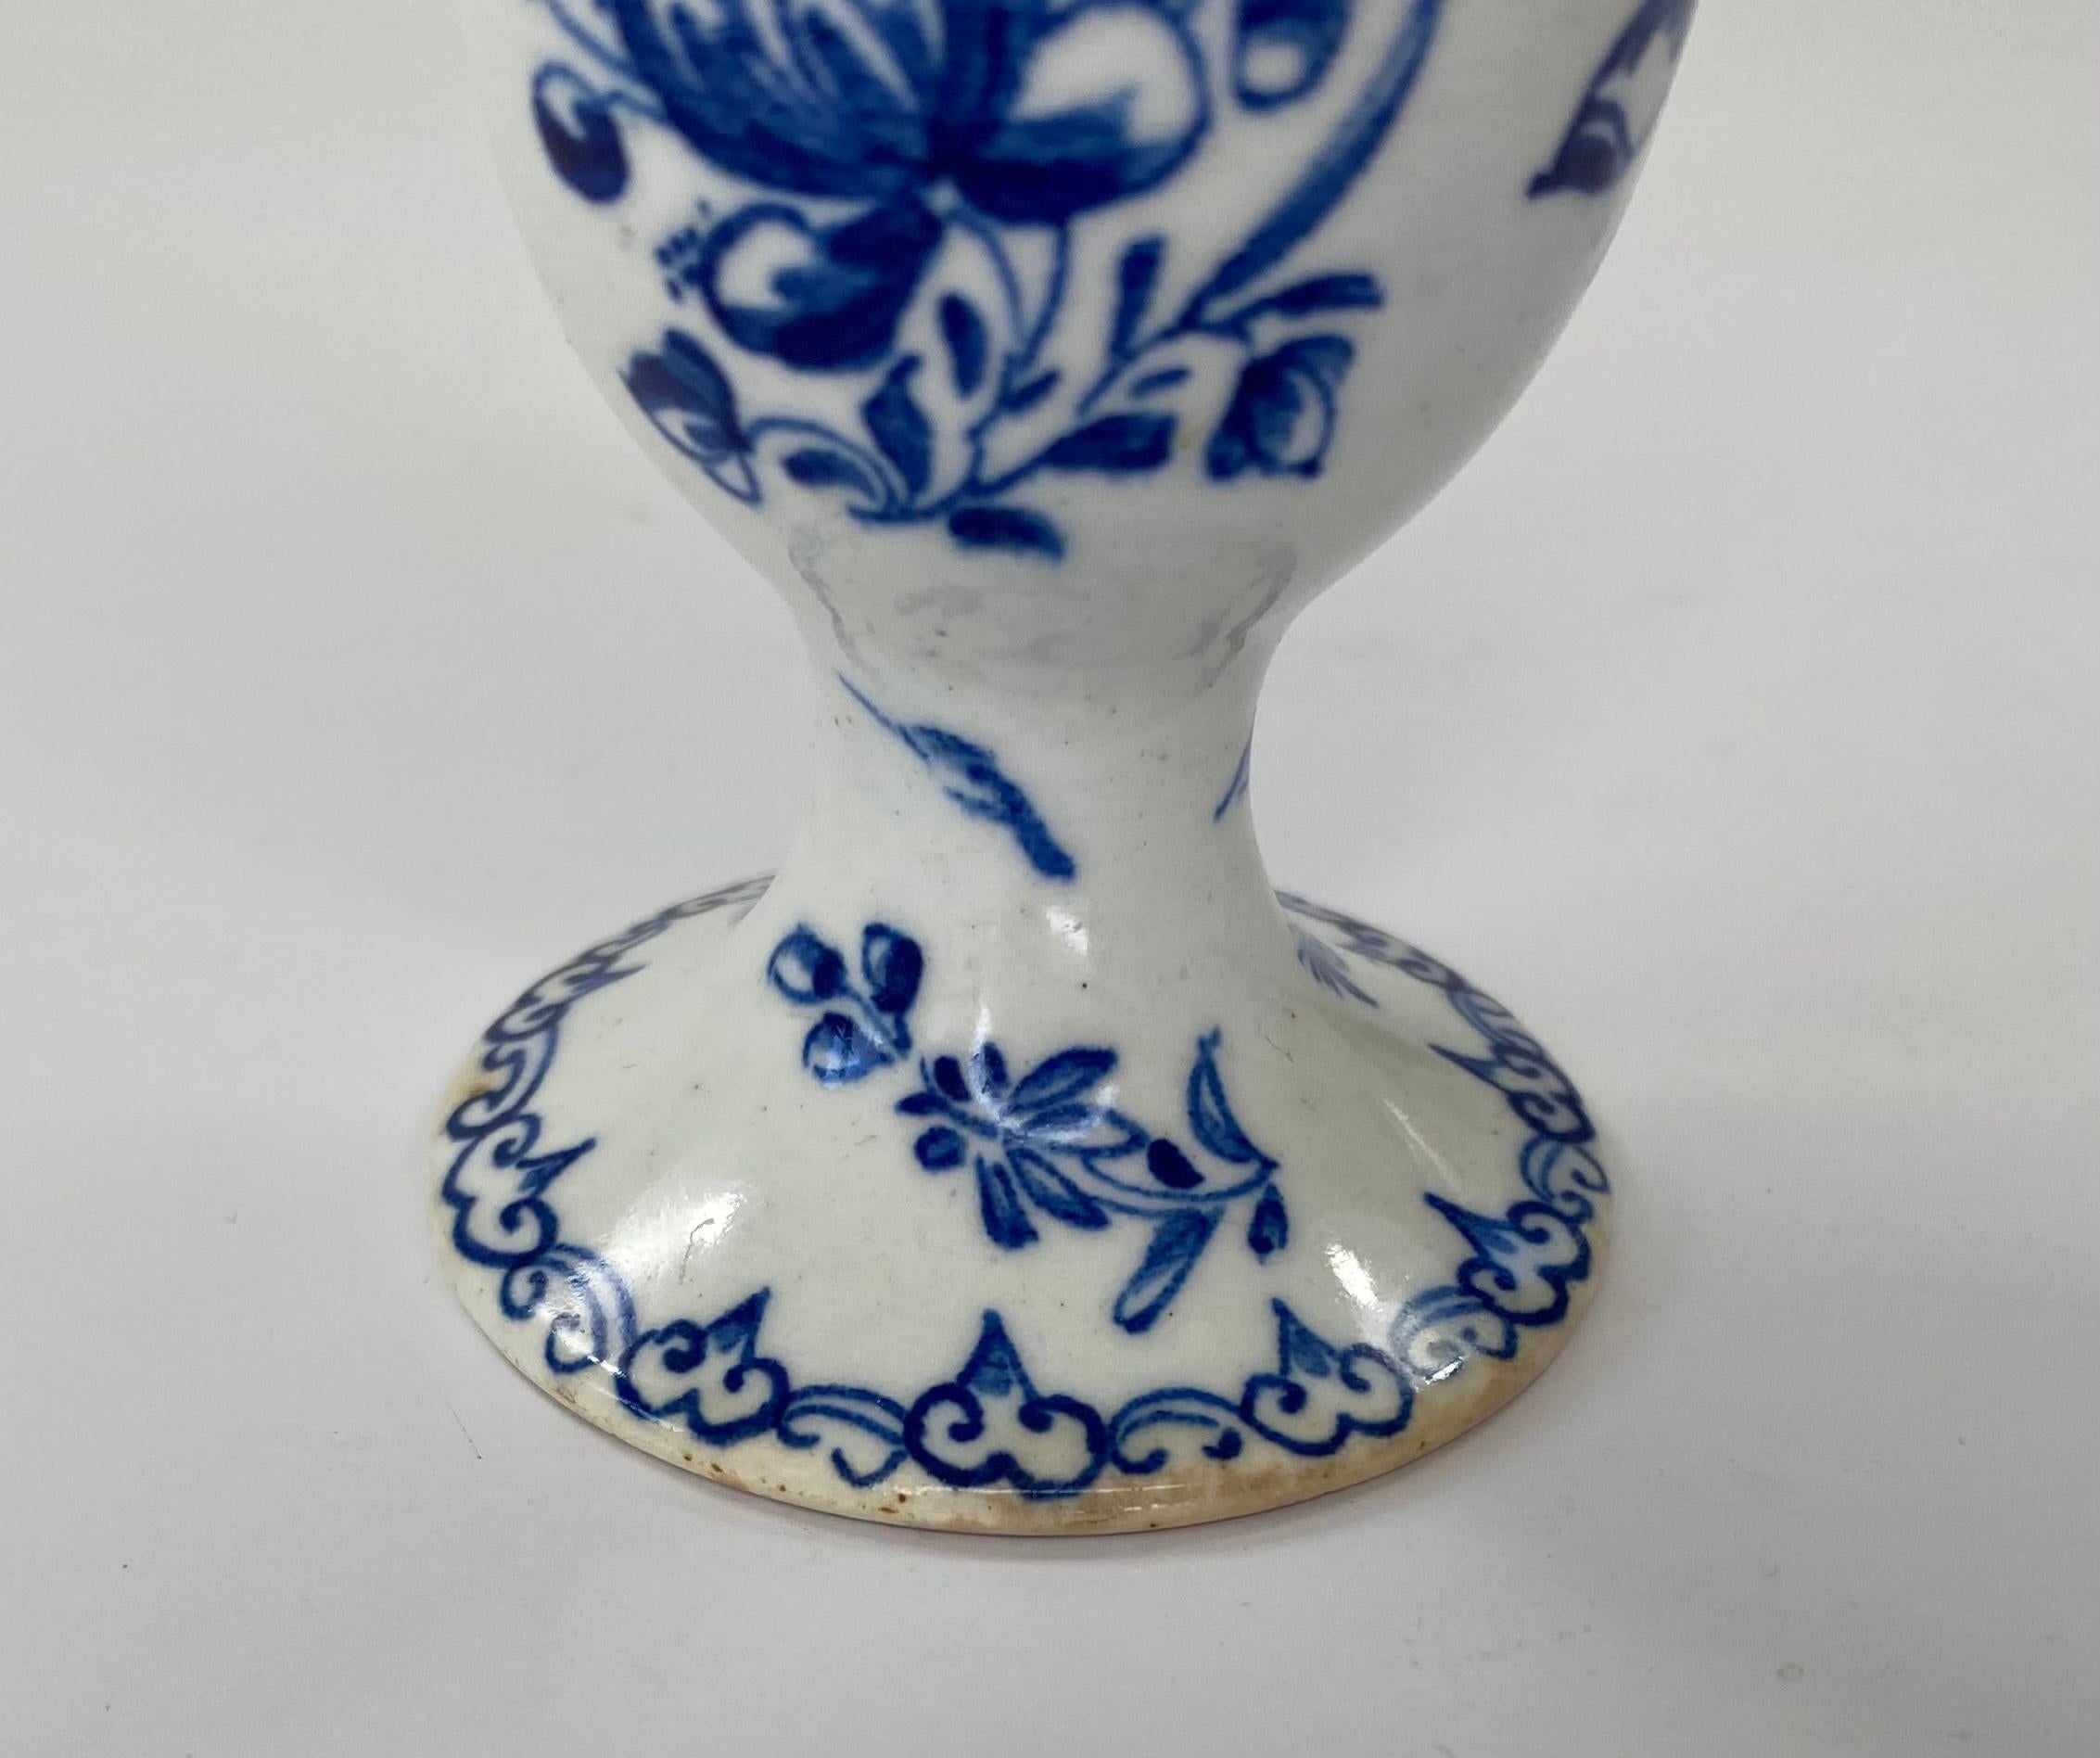 Fired Rare Bow Porcelain Egg Cup, c. 1760